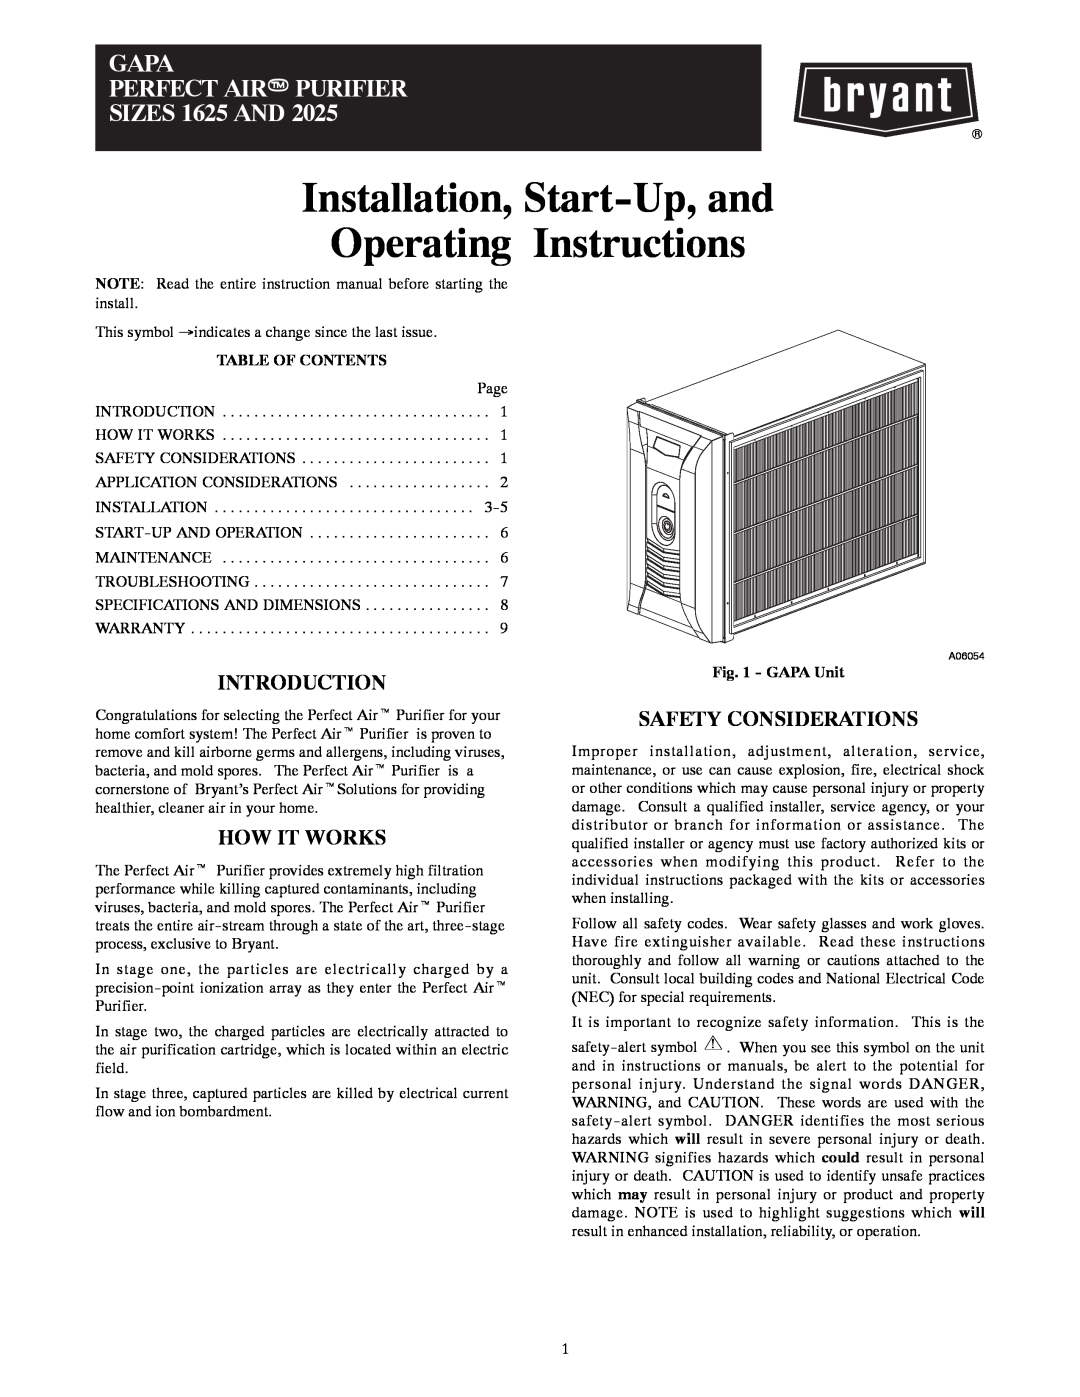 Bryant AIRT PURIFIER operating instructions Introduction, How It Works, Safety Considerations, Table Of Contents 